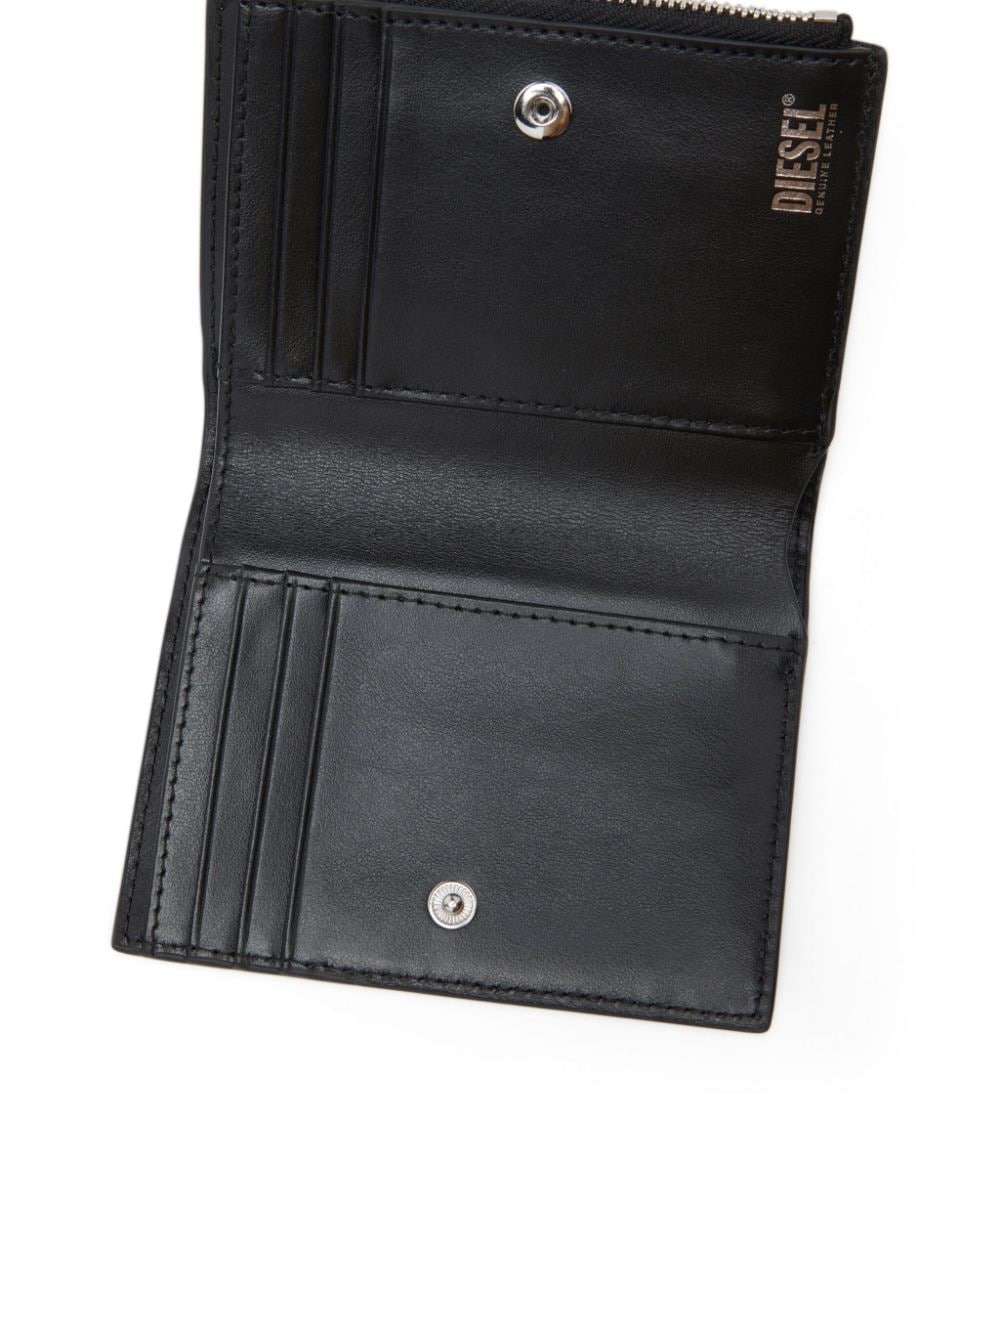 1dr leather wallet - 3